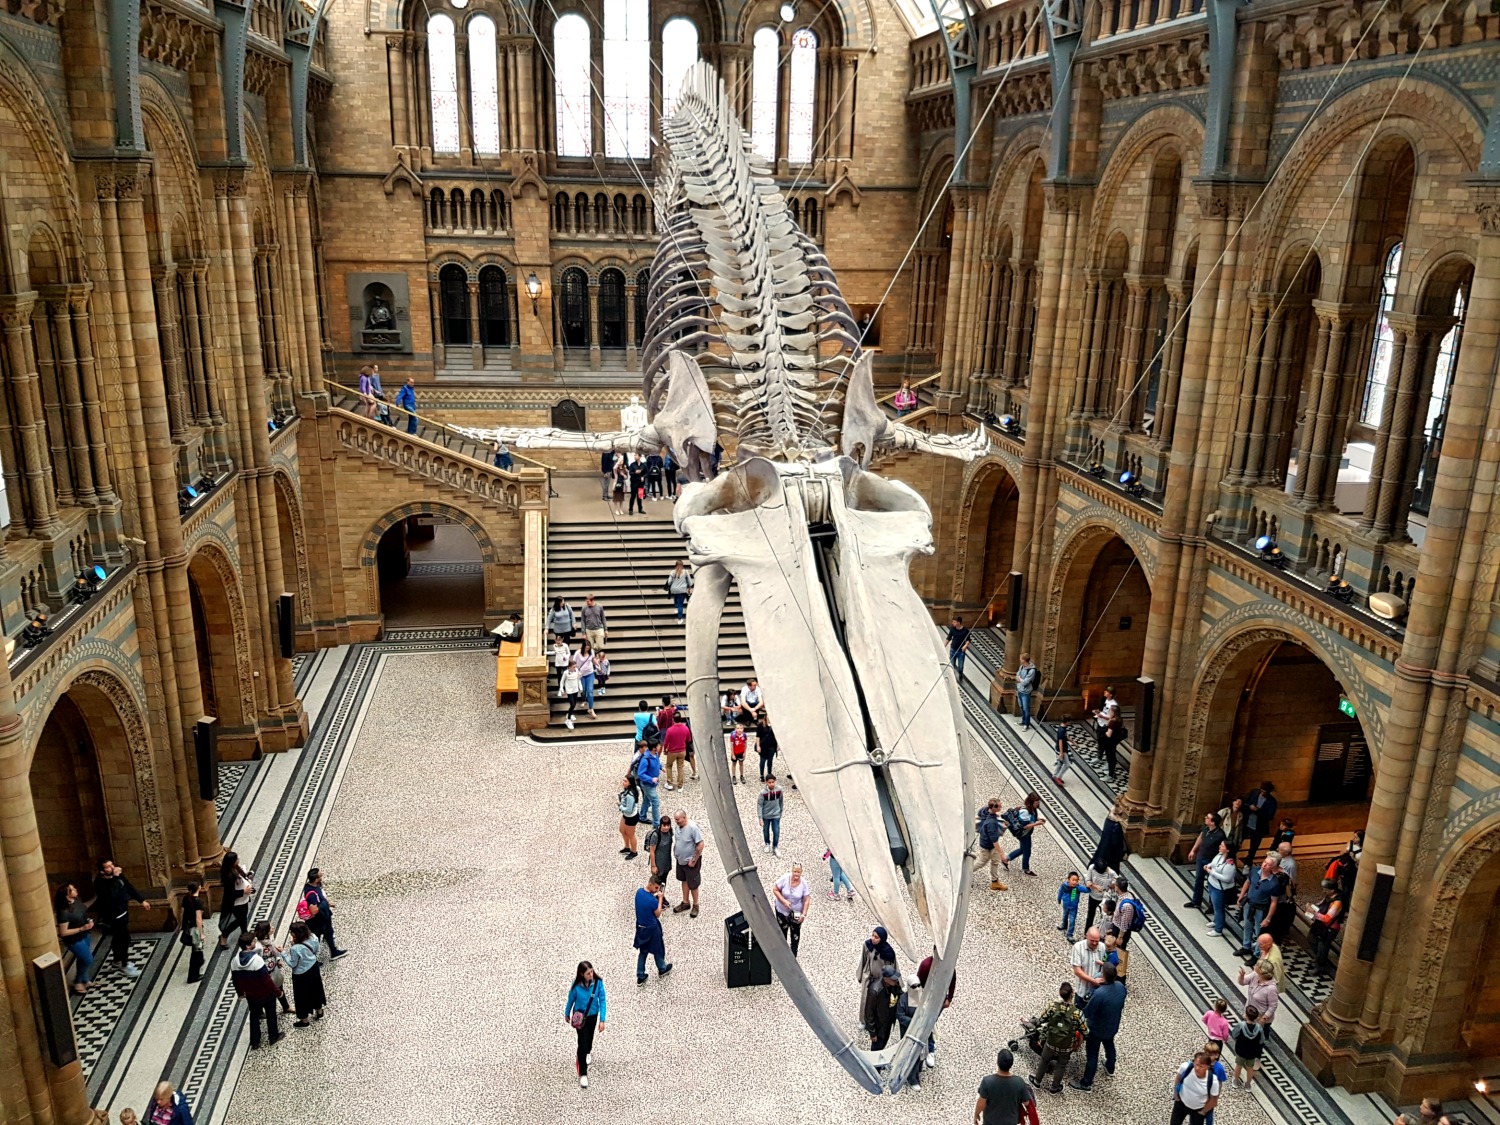 Family London: tips for visiting the Natural History Museum with a toddler - mummytravels